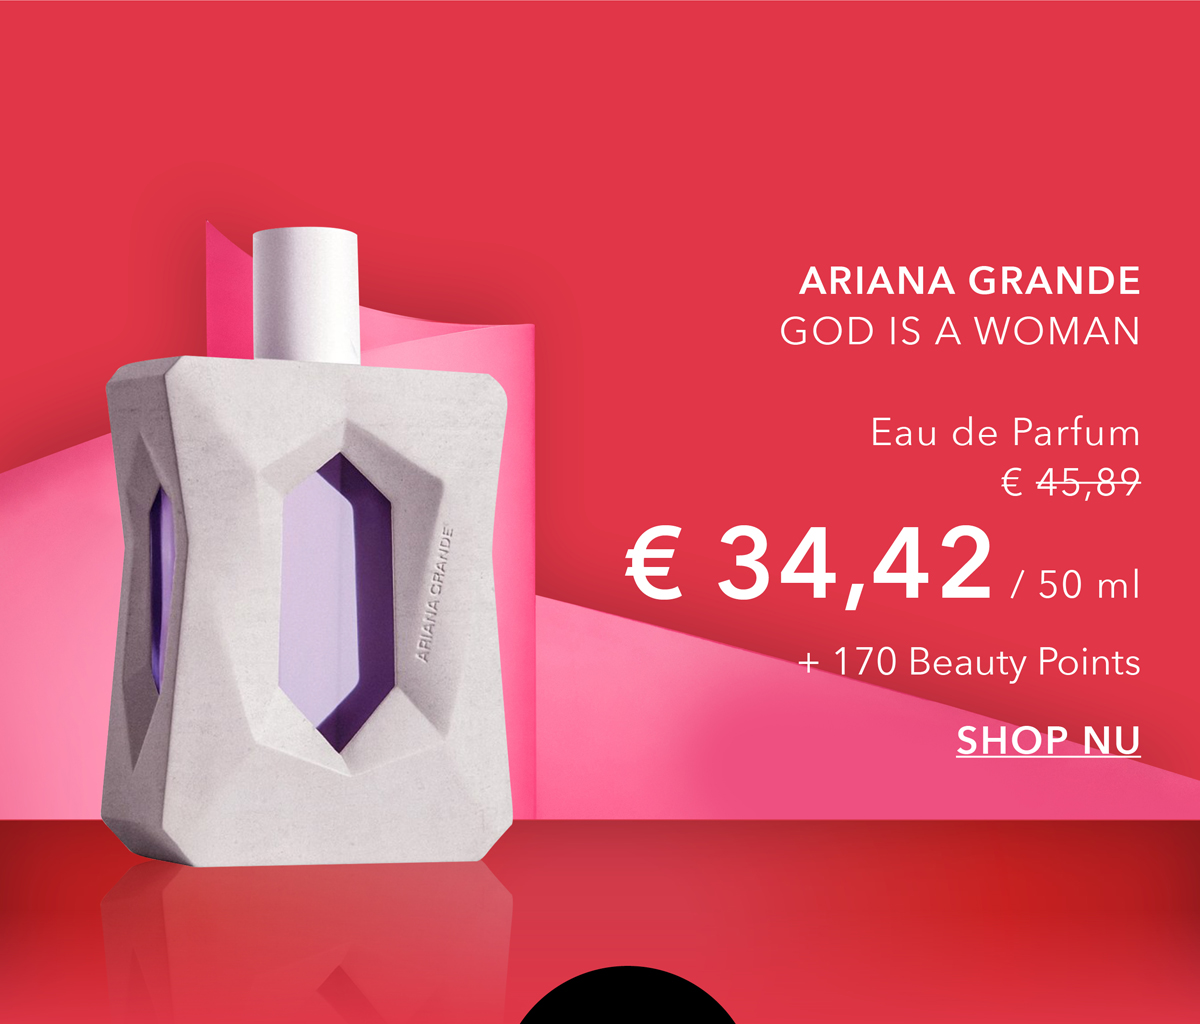 Product 1 - Ariana Grande God is a woman